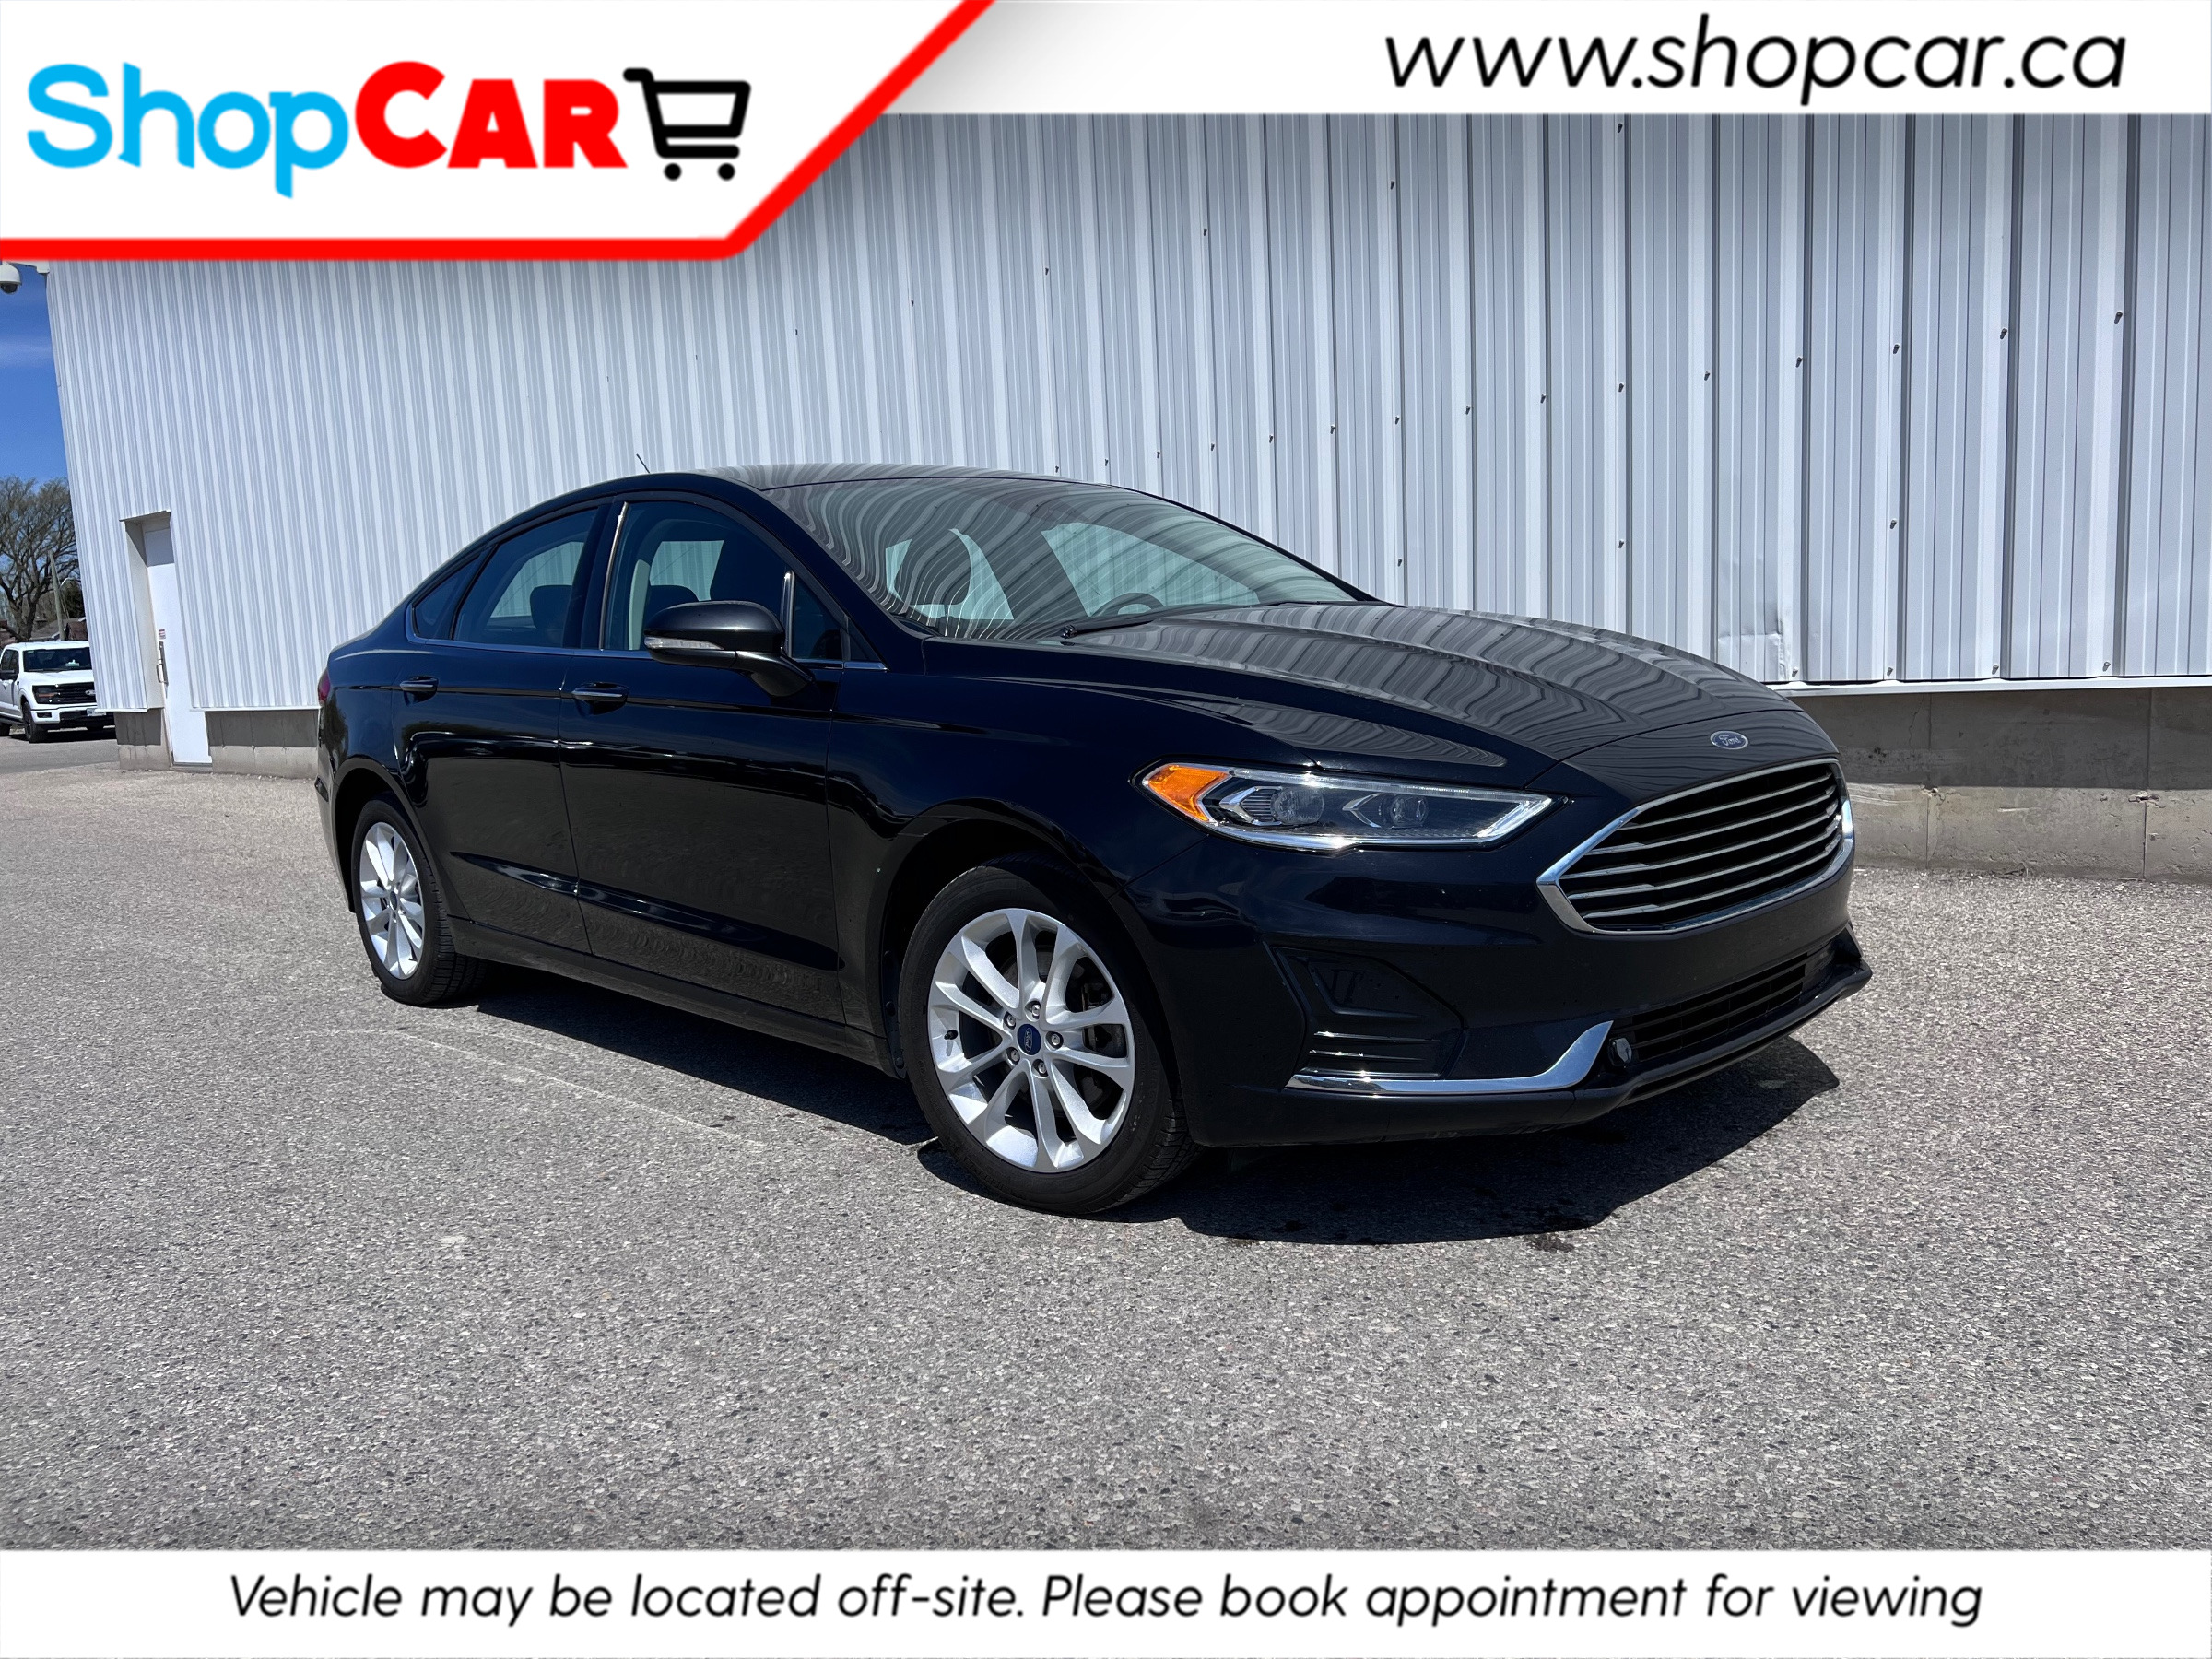 2020 Ford Fusion Energi New Arrival | Hybrid | Low KMs | Heated Seats